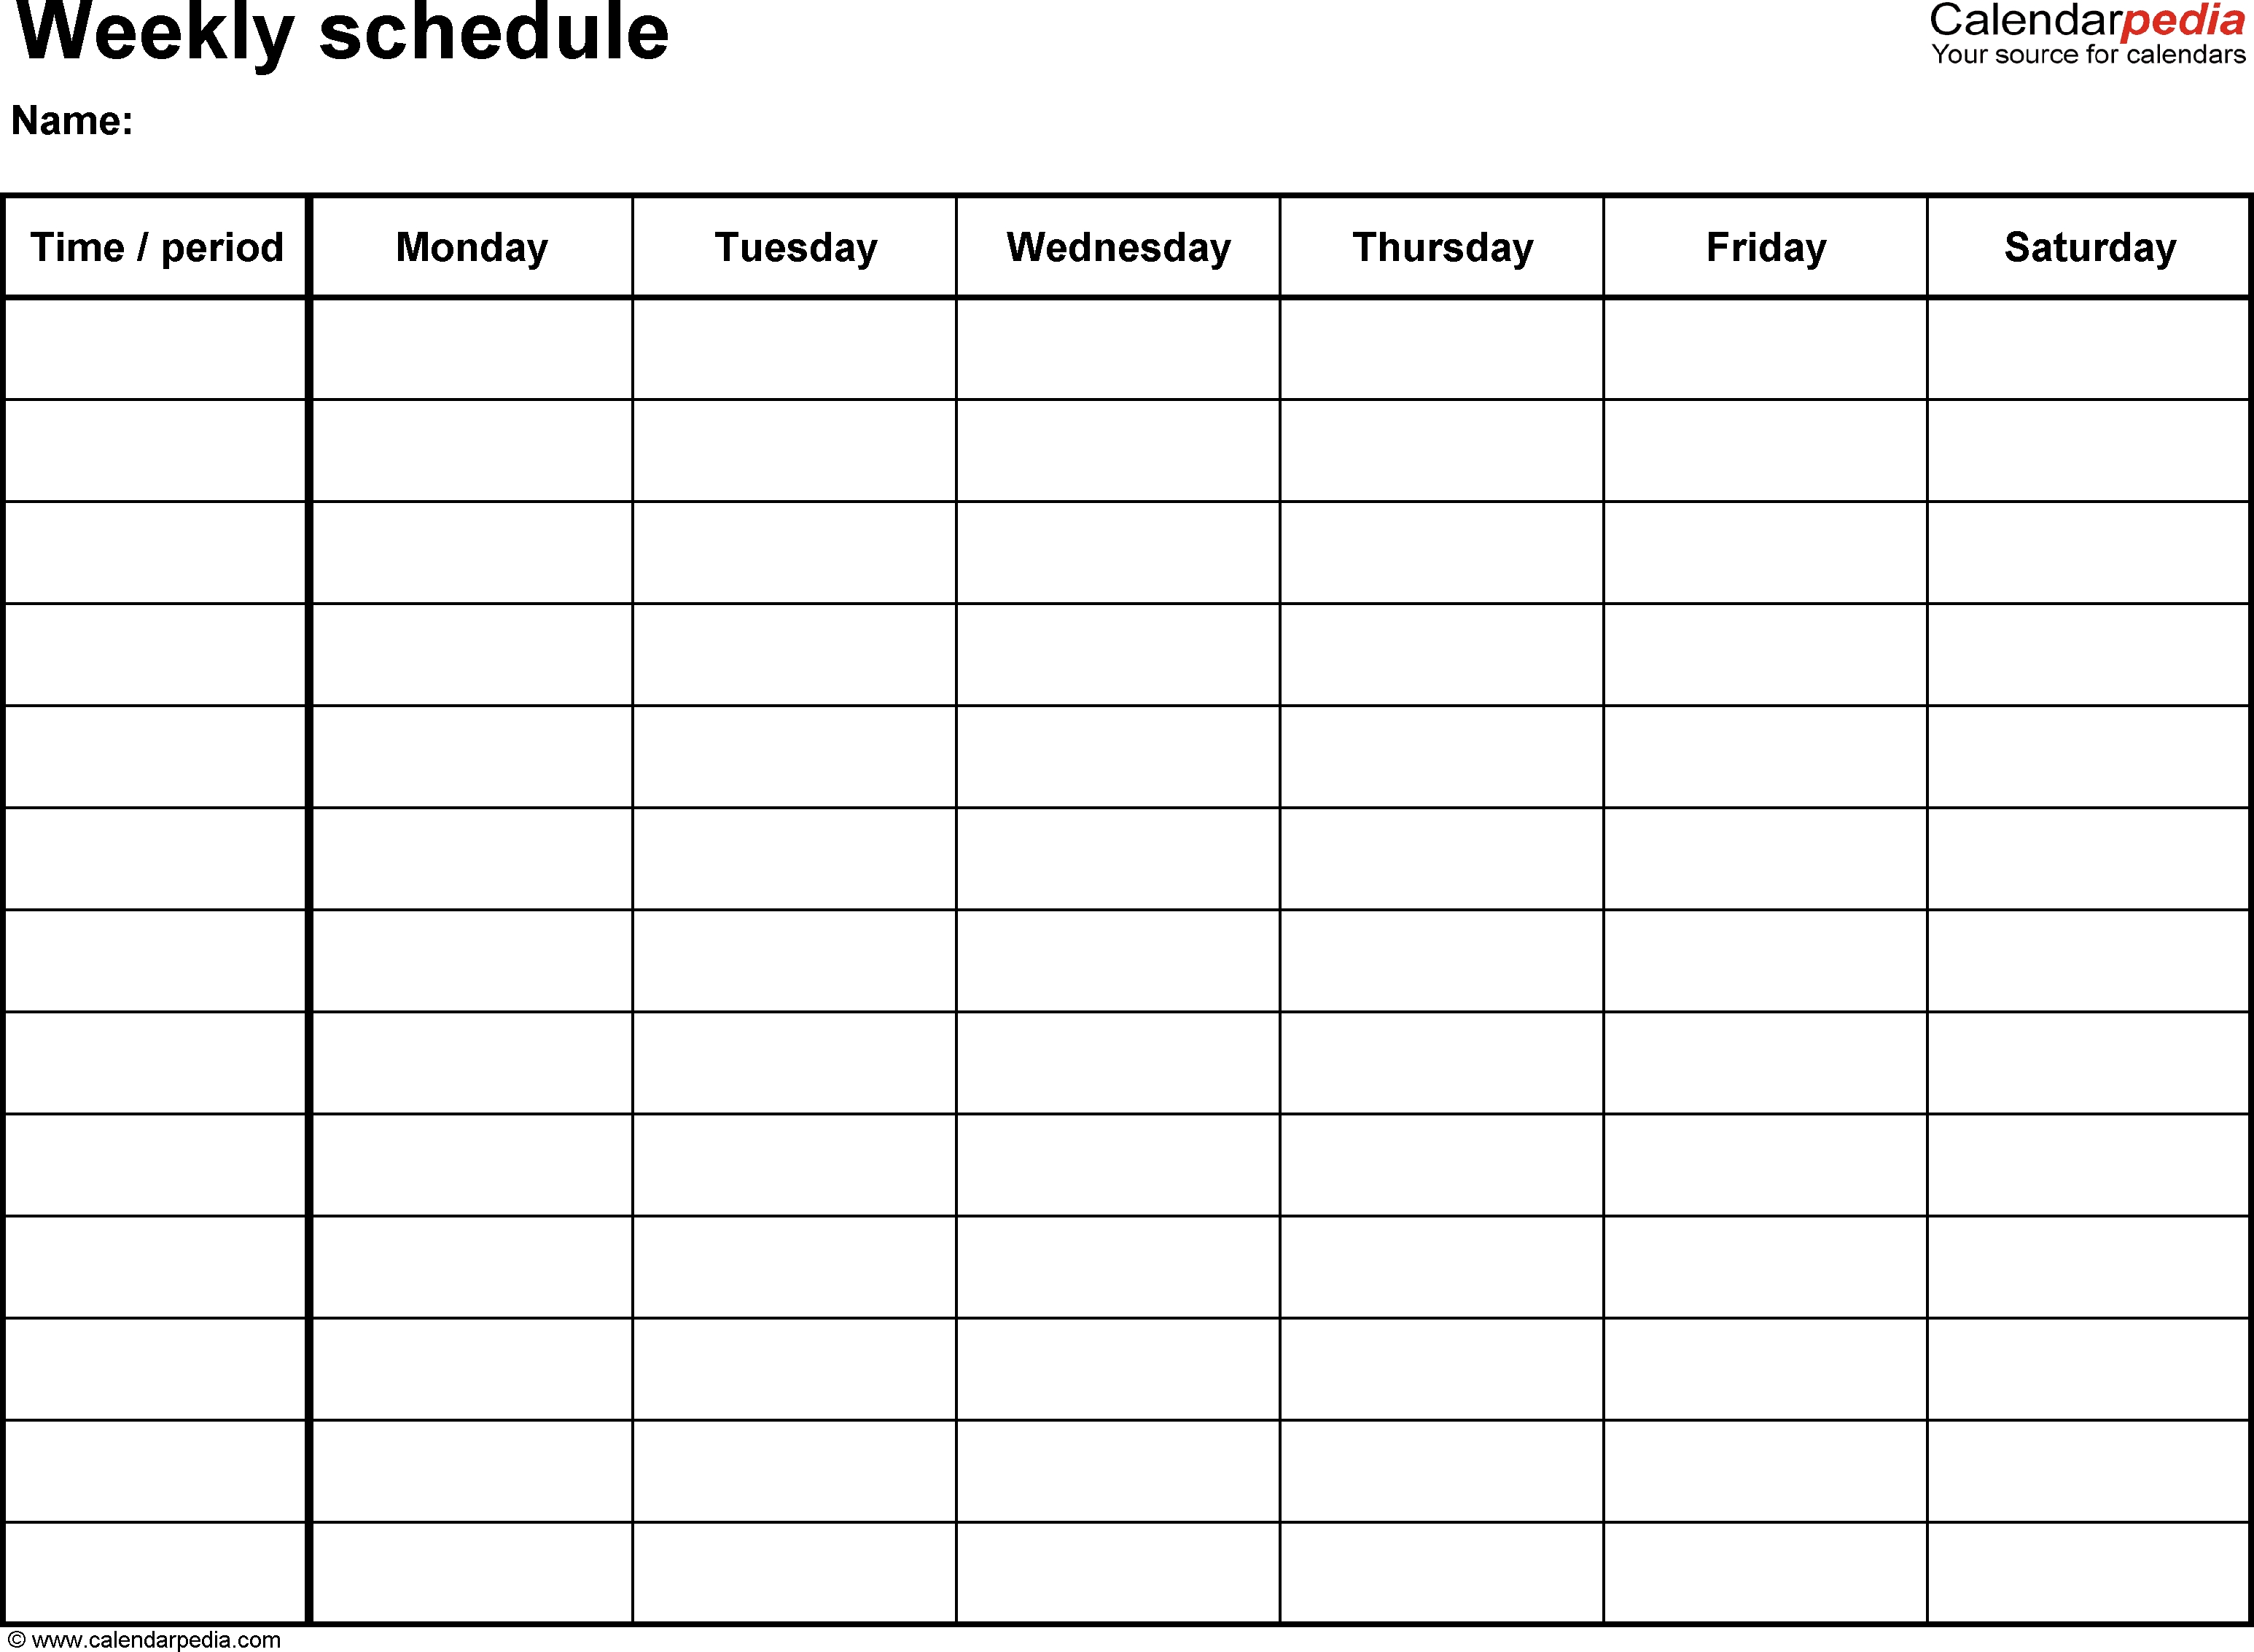 Free Weekly Schedule Templates For Pdf - 18 Templates for Blank Weekly Schedule Template Printable